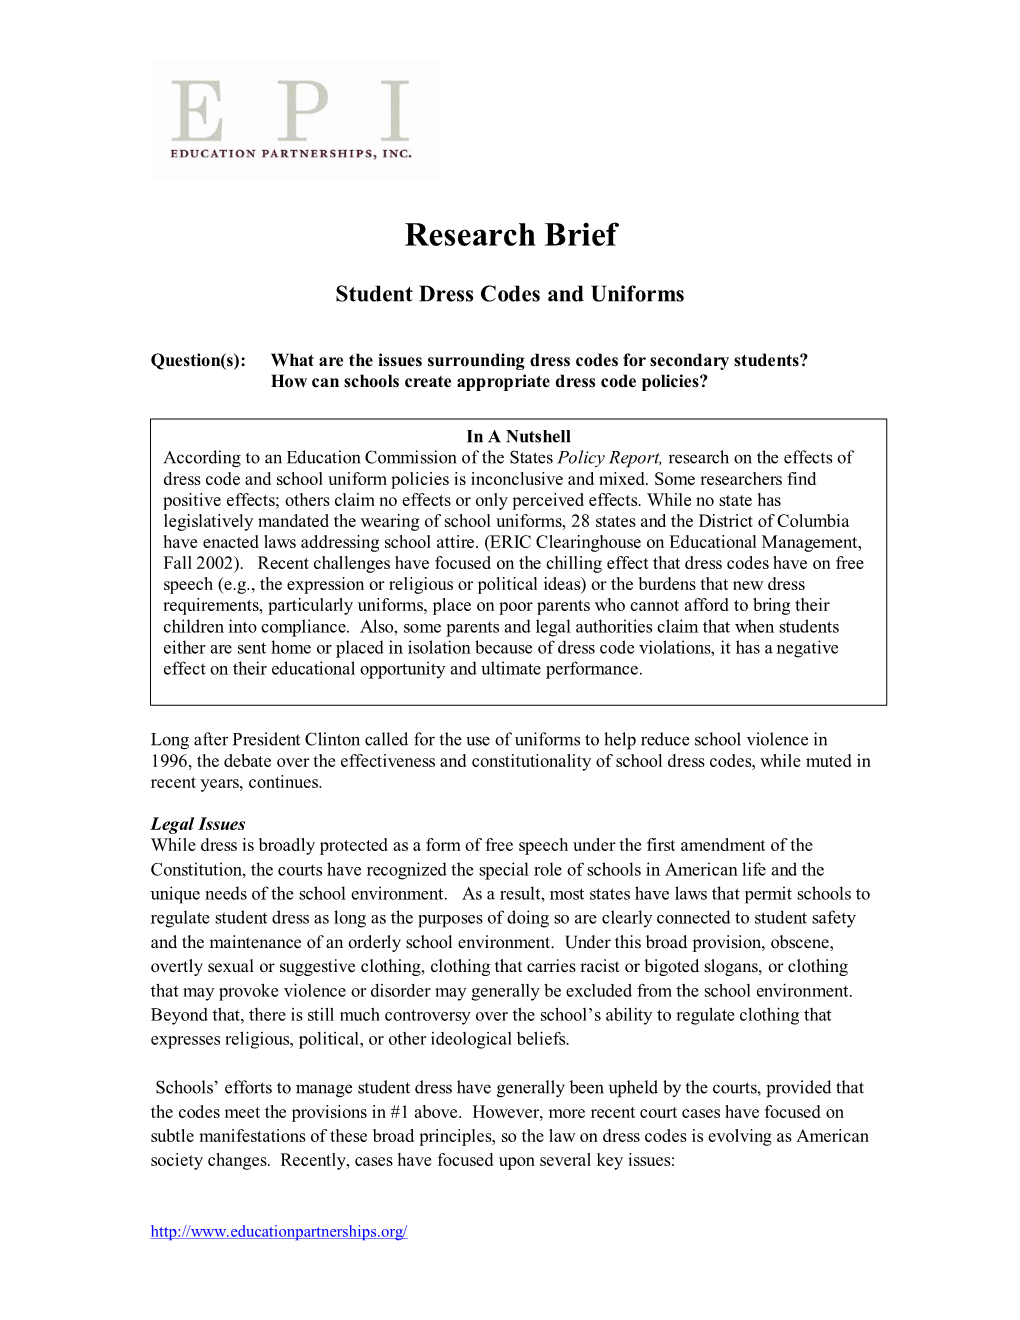 Research Brief: Student Dress Codes and Uniforms